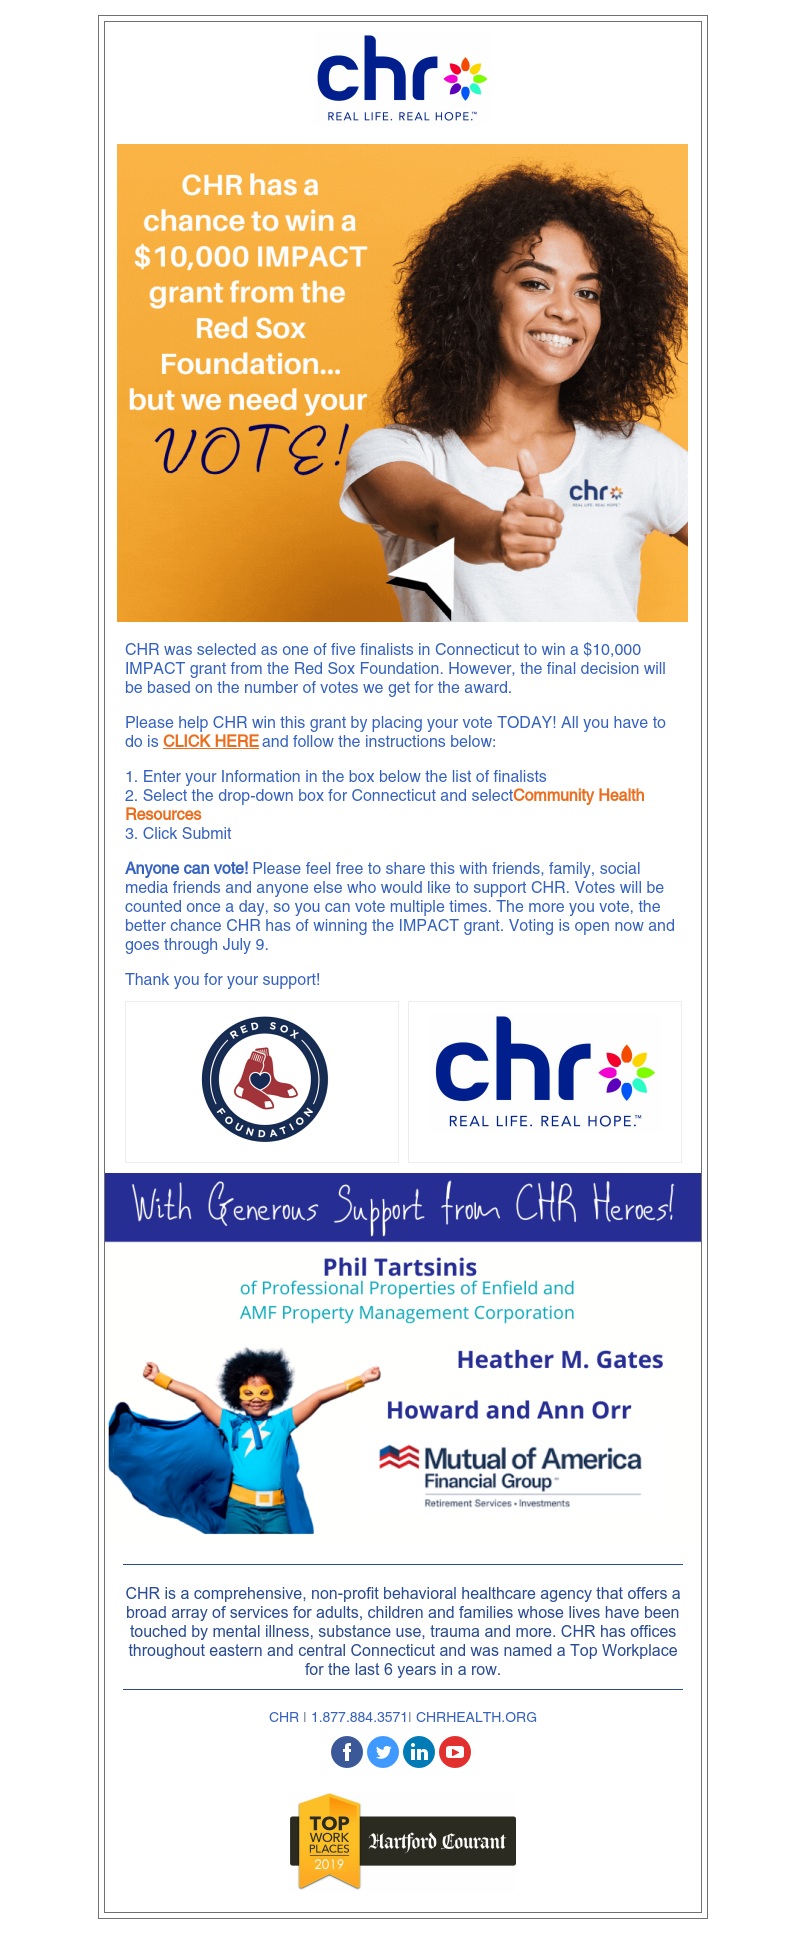 Help CHR win a $10,000 IMPACT grant from the Red Sox Foundation!